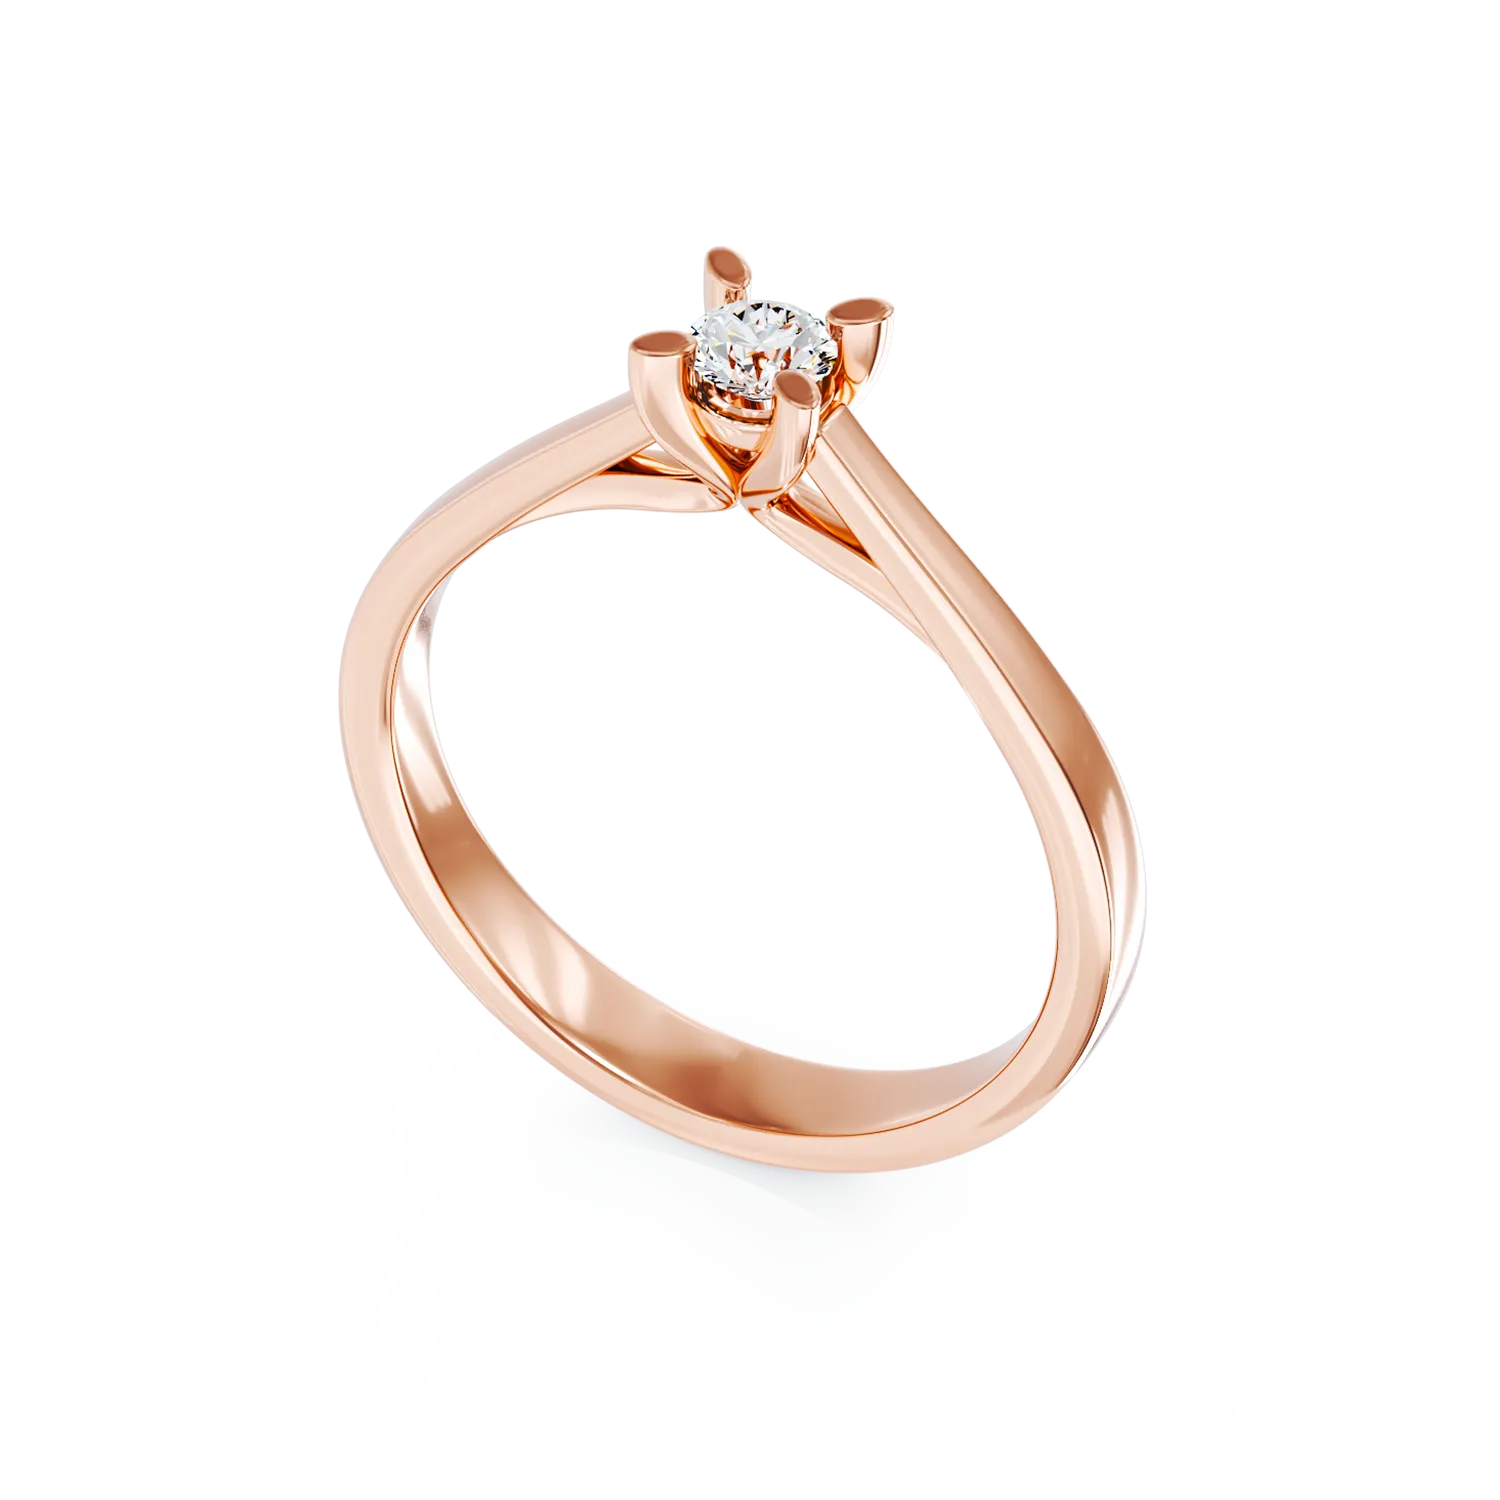 14K rose gold engagement ring with a 0.10ct solitaire diamond